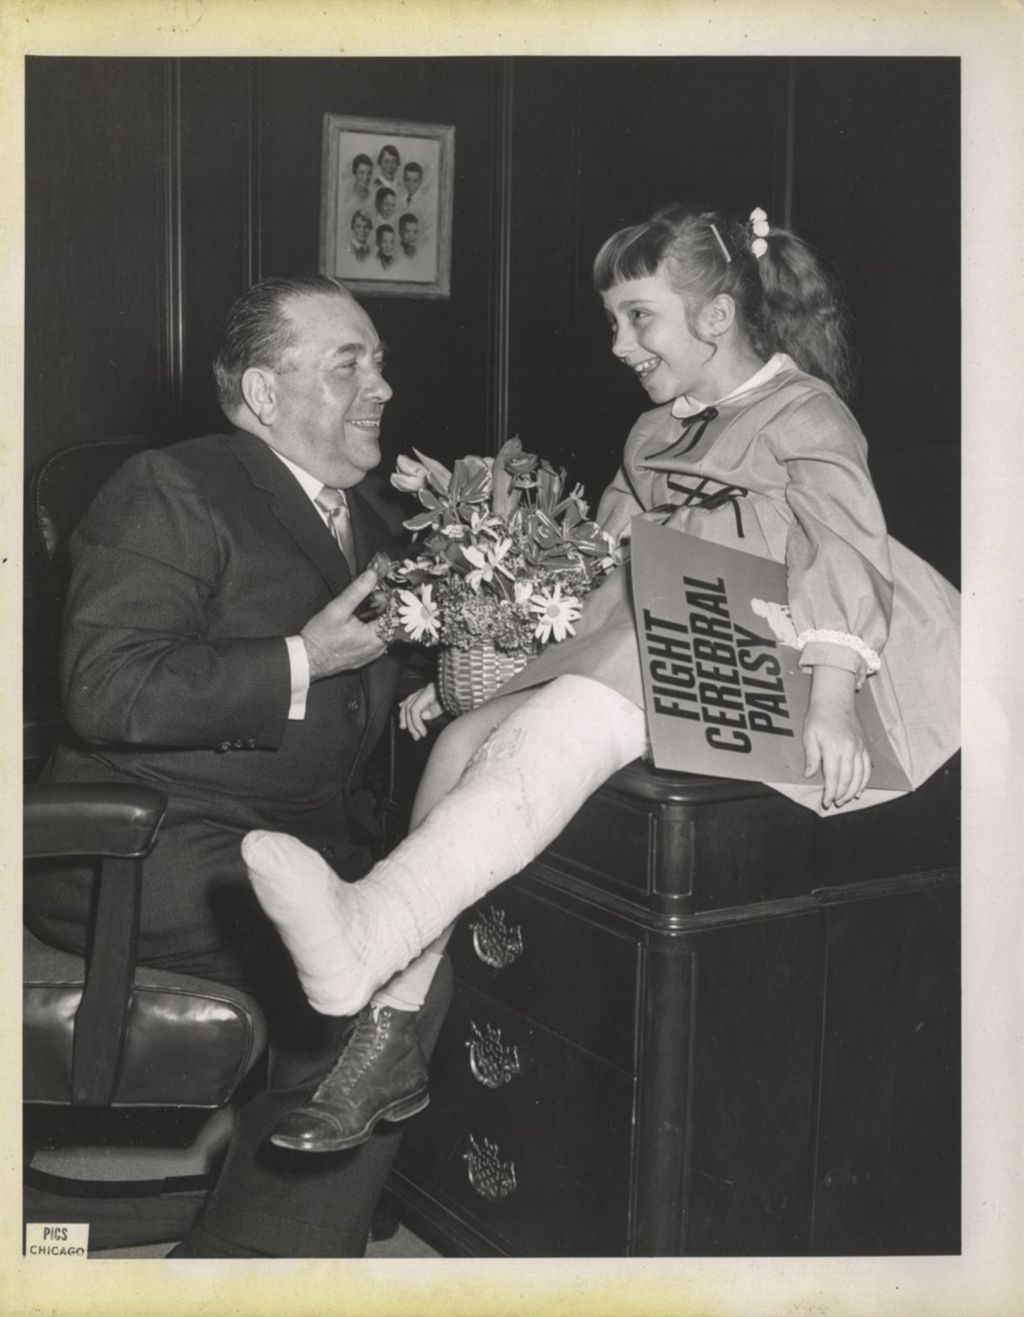 Miniature of Richard J. Daley with a young girl holding a "Fight Cerebral Palsy" sign